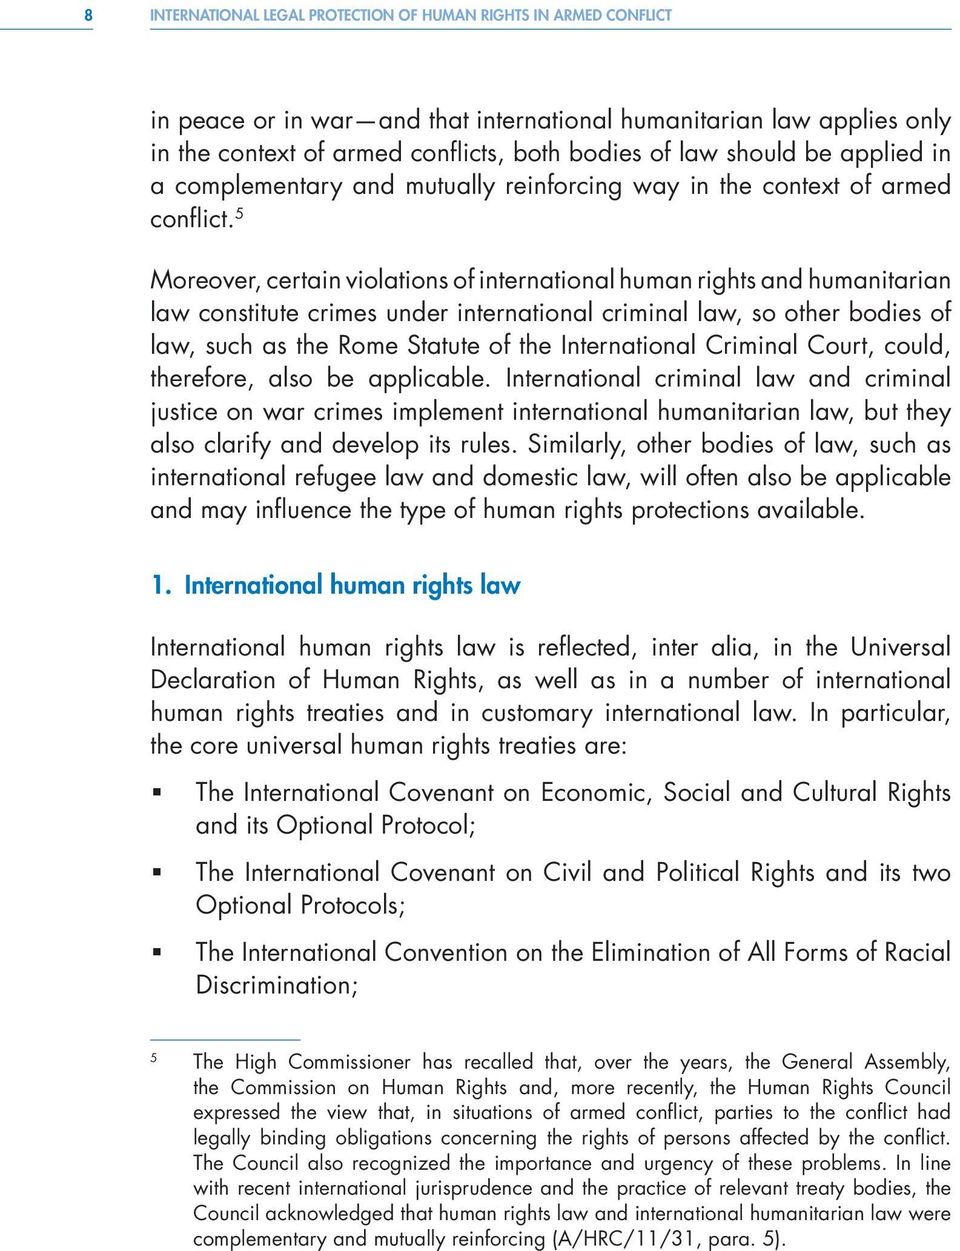 5 Moreover, certain violations of international human rights and humanitarian law constitute crimes under international criminal law, so other bodies of law, such as the Rome Statute of the